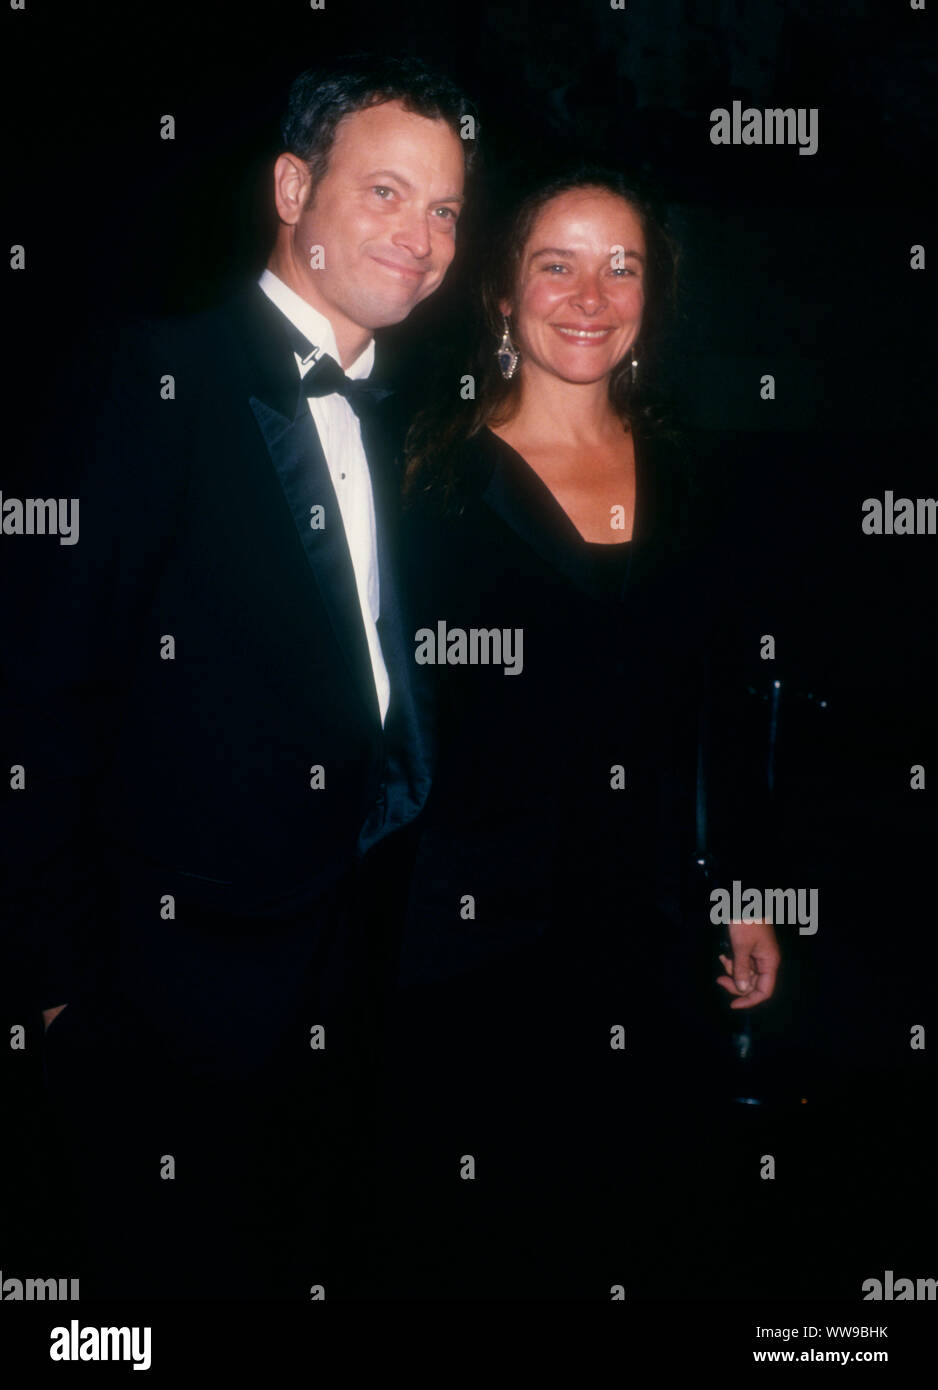 Century City, California, USA 7th December 1994 Actor Gary Sinise and wife Moira Harris attend the Fifth Annual Fire and Ice Ball to Benefit the Revlon/UCLA Women's Cancer Research Program on December 7, 1994 at 20th Century Fox Studios in Century City, California, USA. Photo by Barry King/Alamy Stock Photo Stock Photo